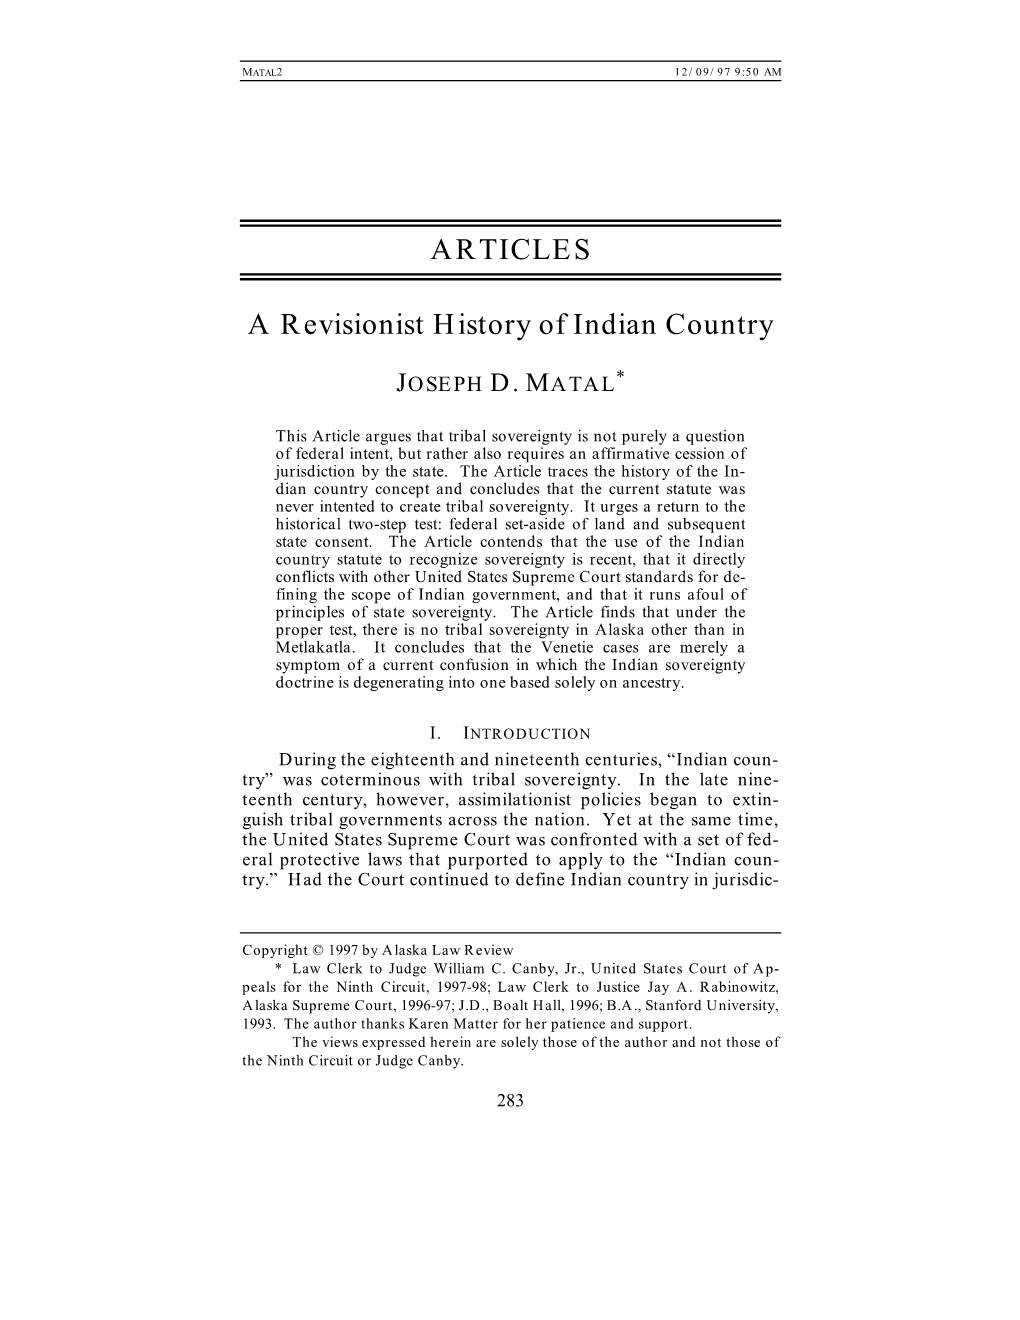 A Revisionist History of Indian Country